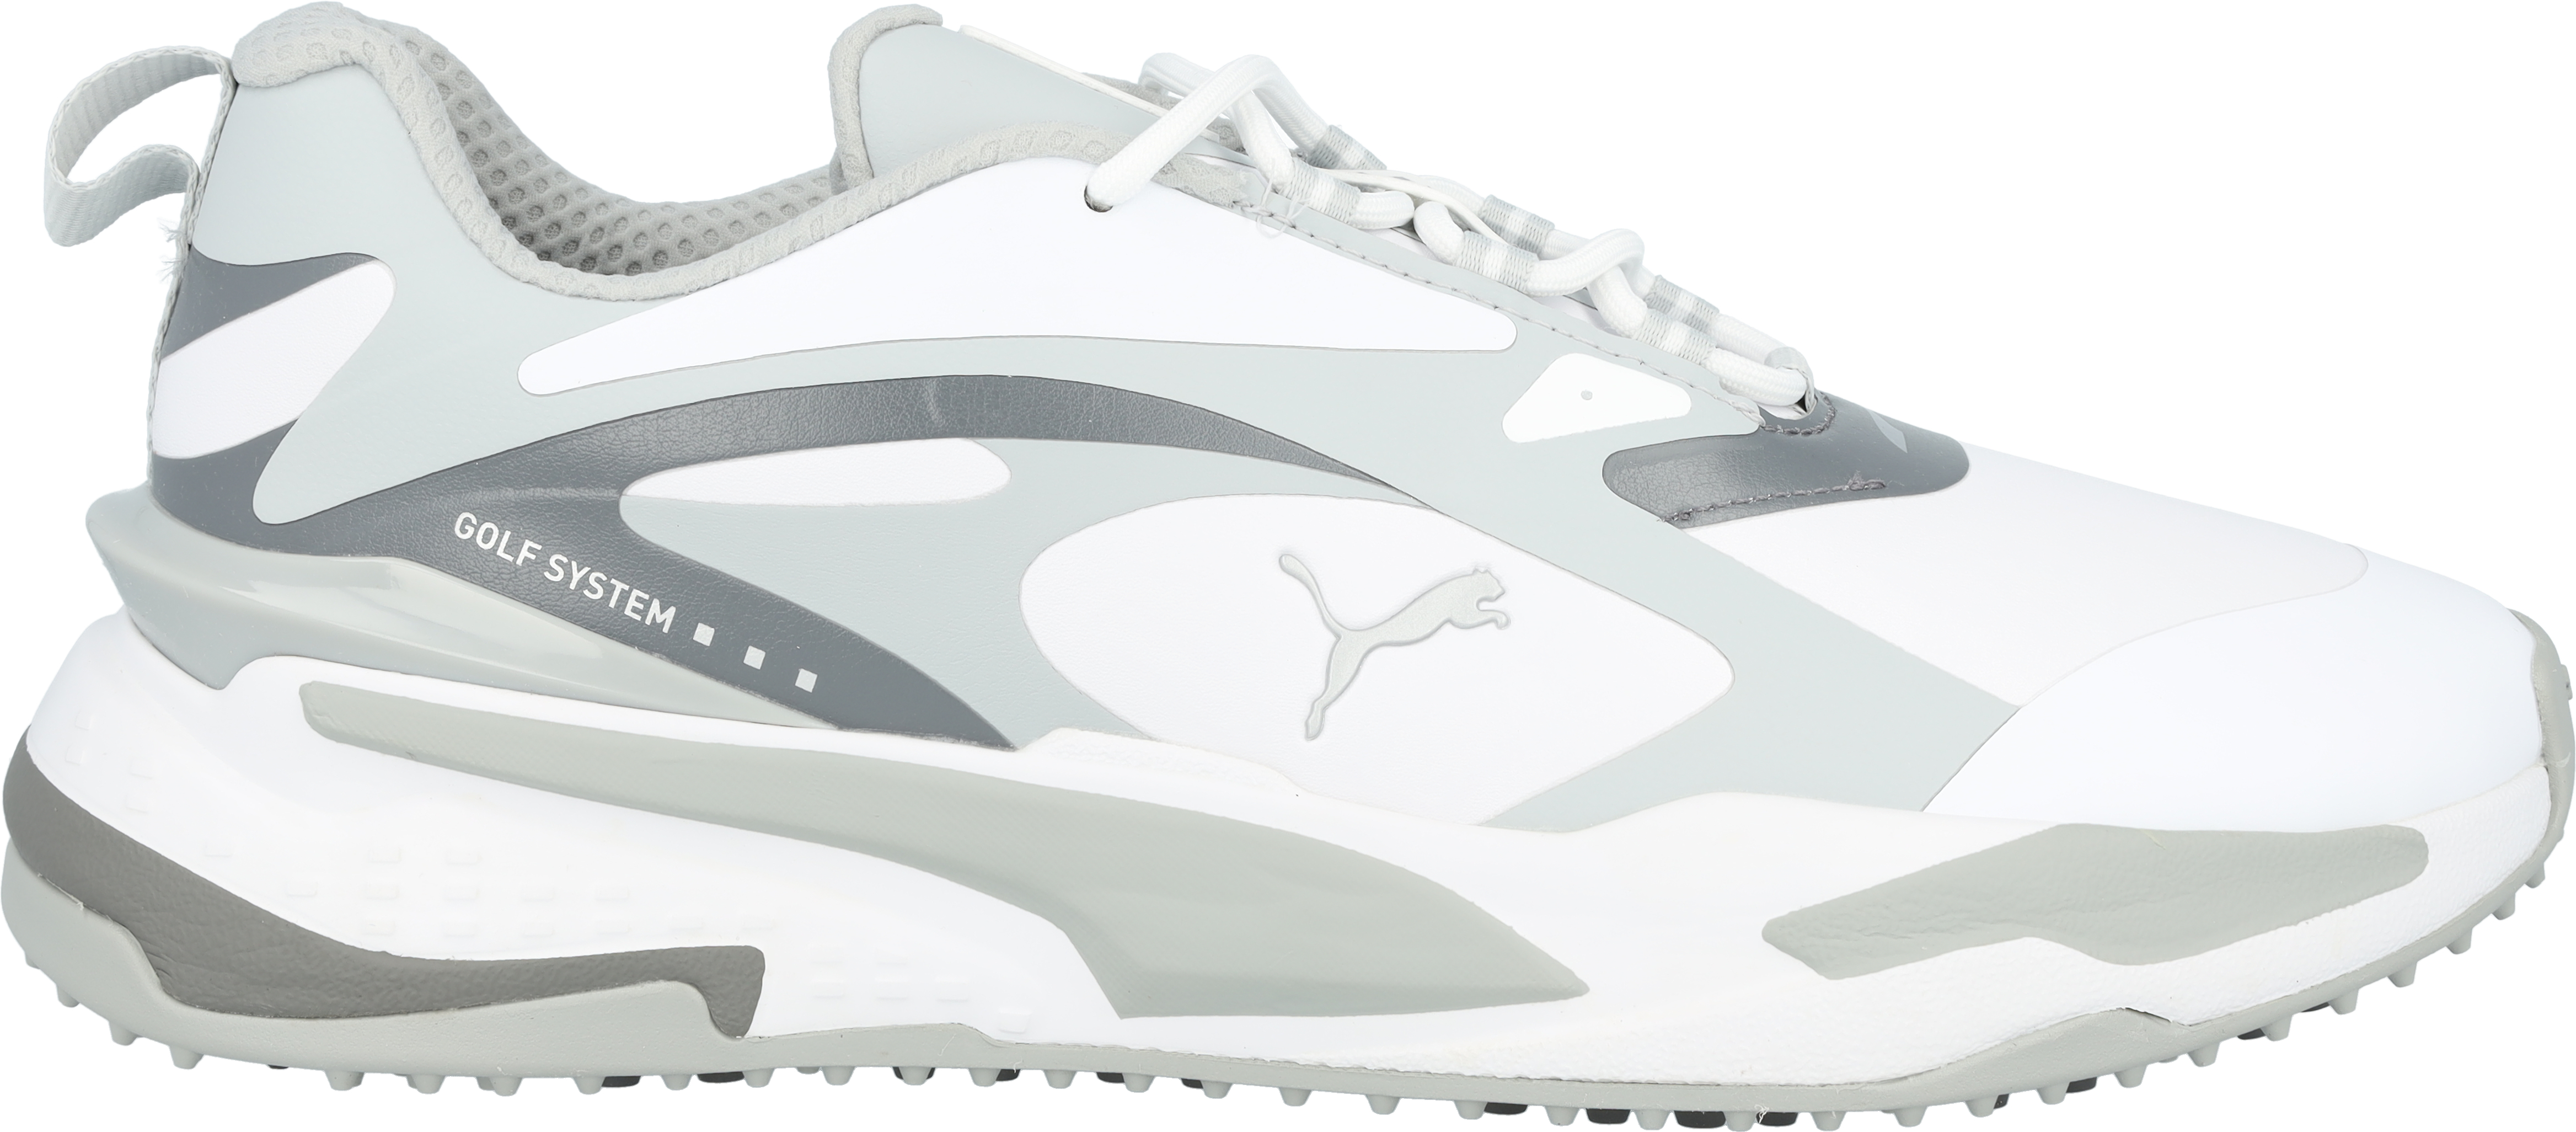 Puma GS Fast 376357-02 Size 12 Medium Spikeless Golf Shoes - image 1 of 1